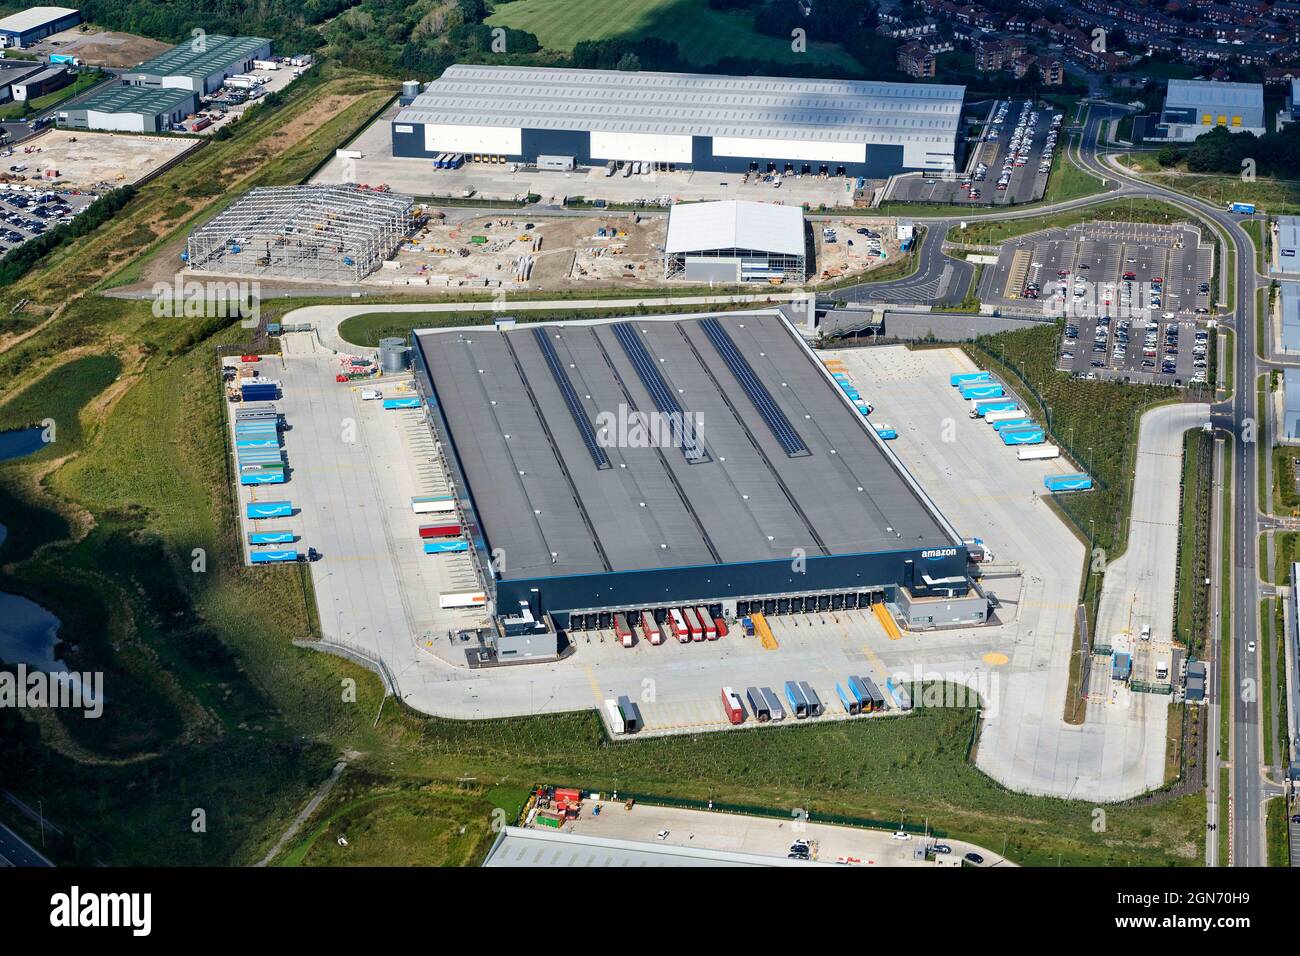 A new Amazon distribution warehouse at Leeds, West Yorkshire, northern England, shot from the air Stock Photo